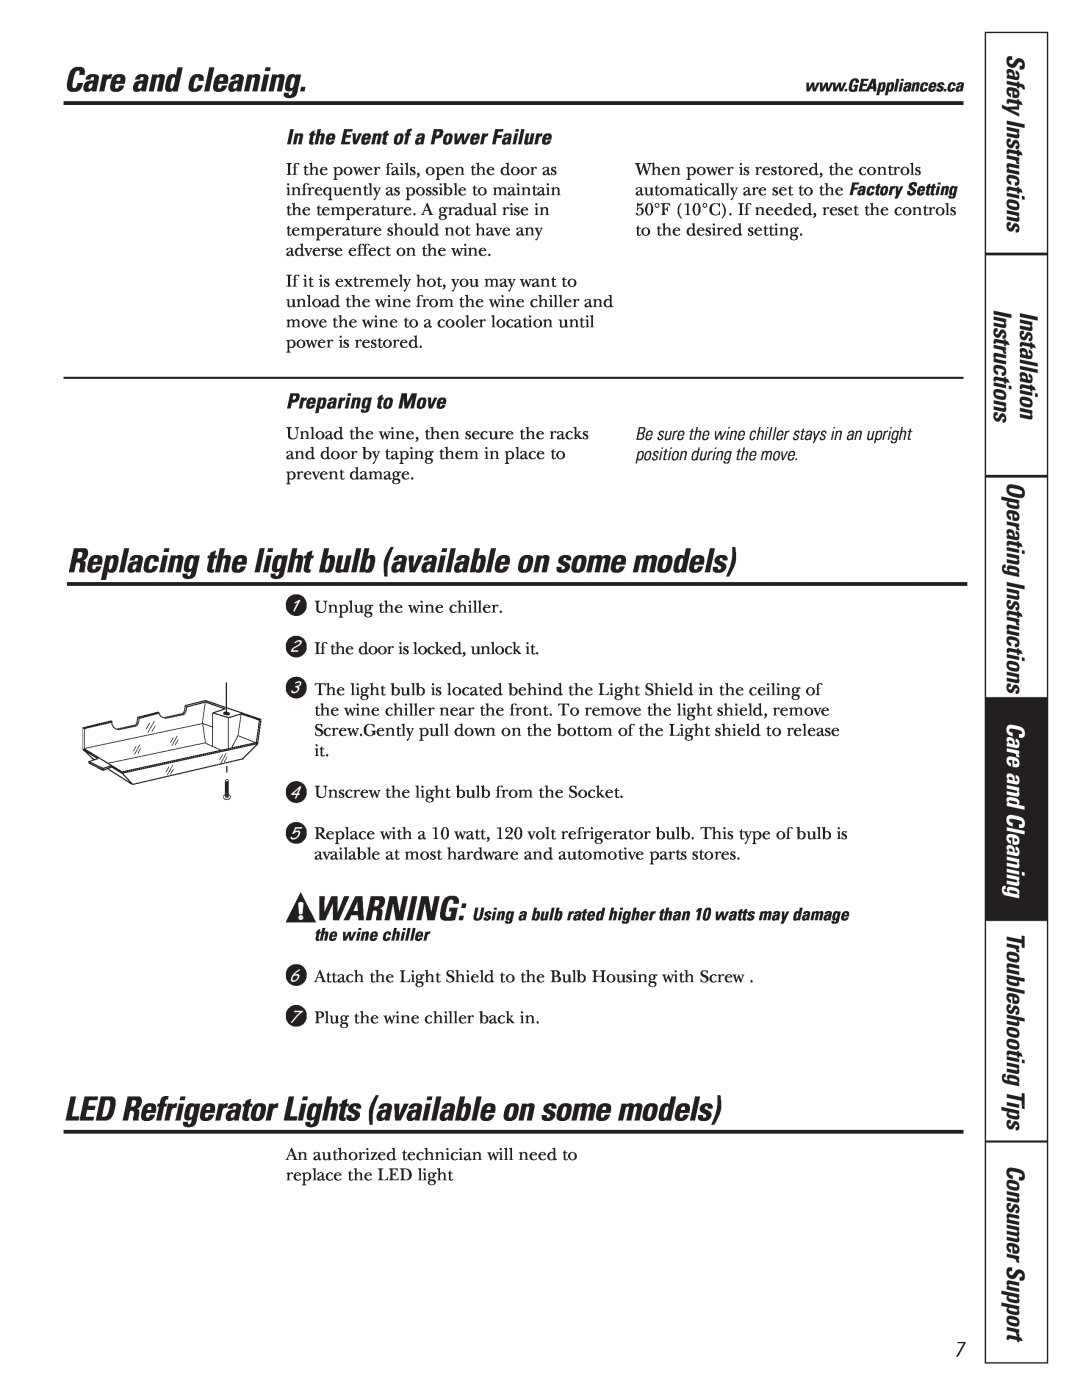 Mabe Canada GWS04 Replacing the light bulb available on some models, LED Refrigerator Lights available on some models 